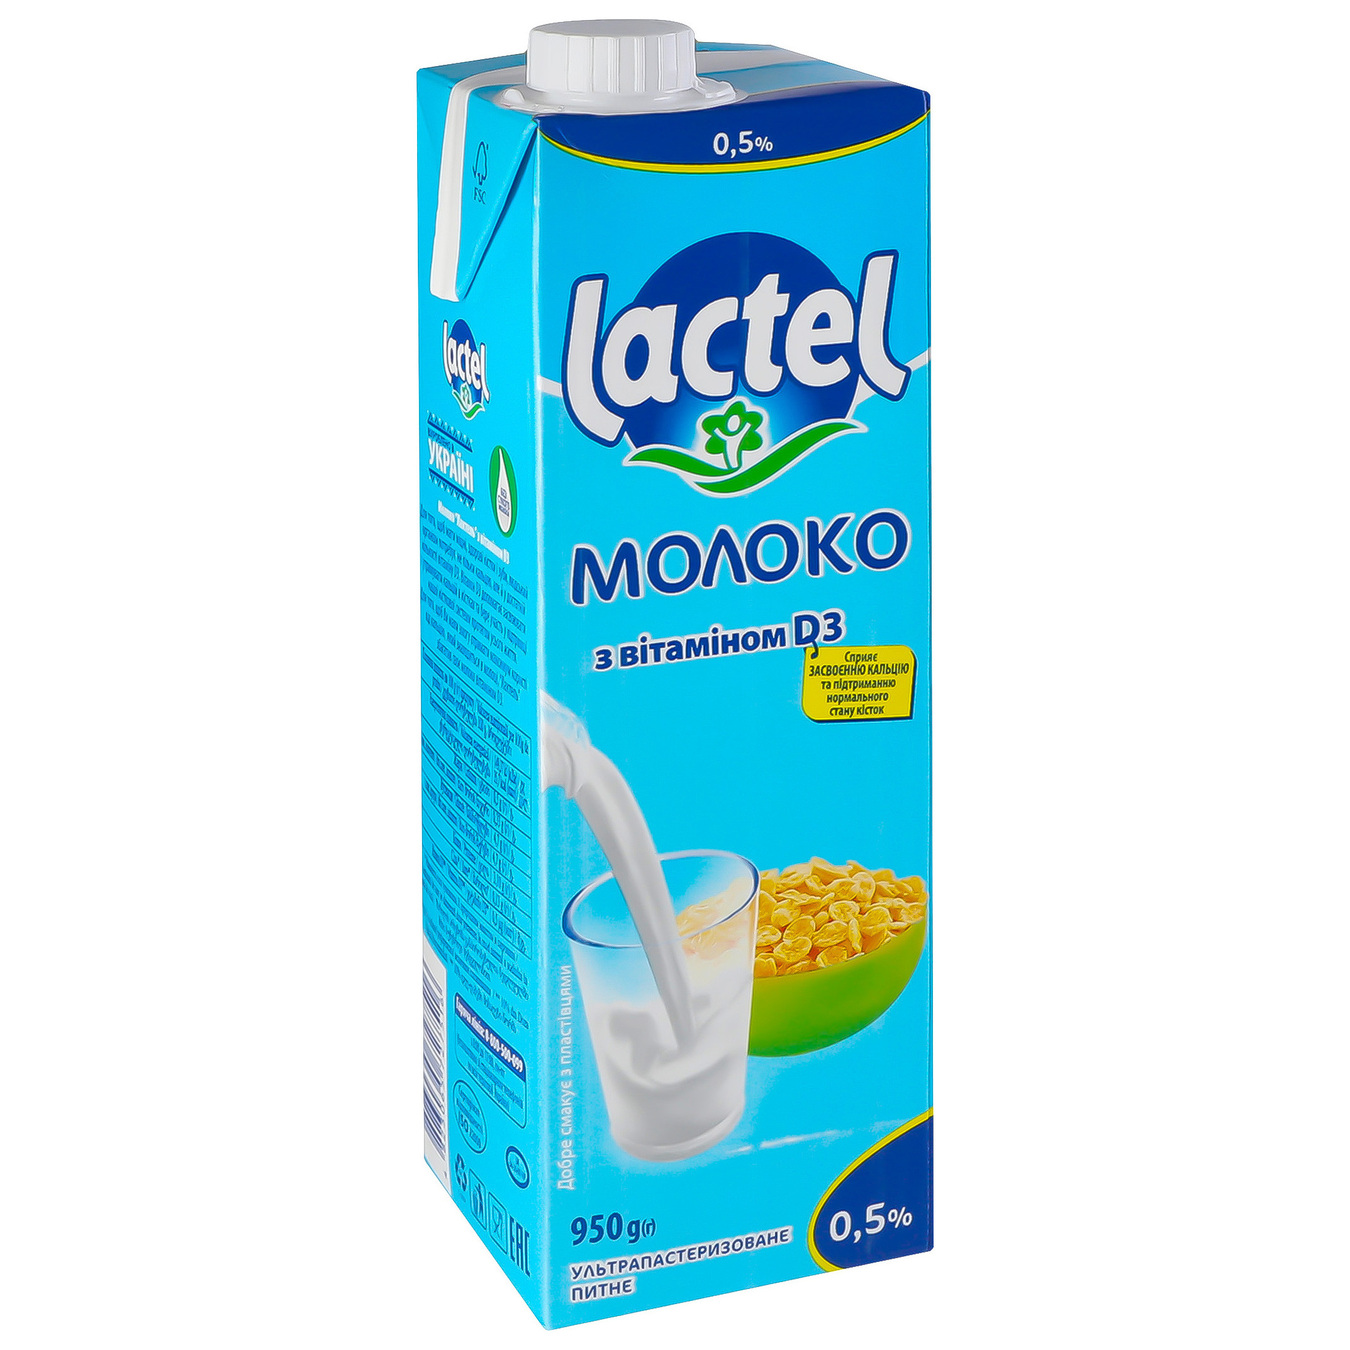 Lactel ultra-pasteurized Milk with vitamin D3 0,5% 950g 2